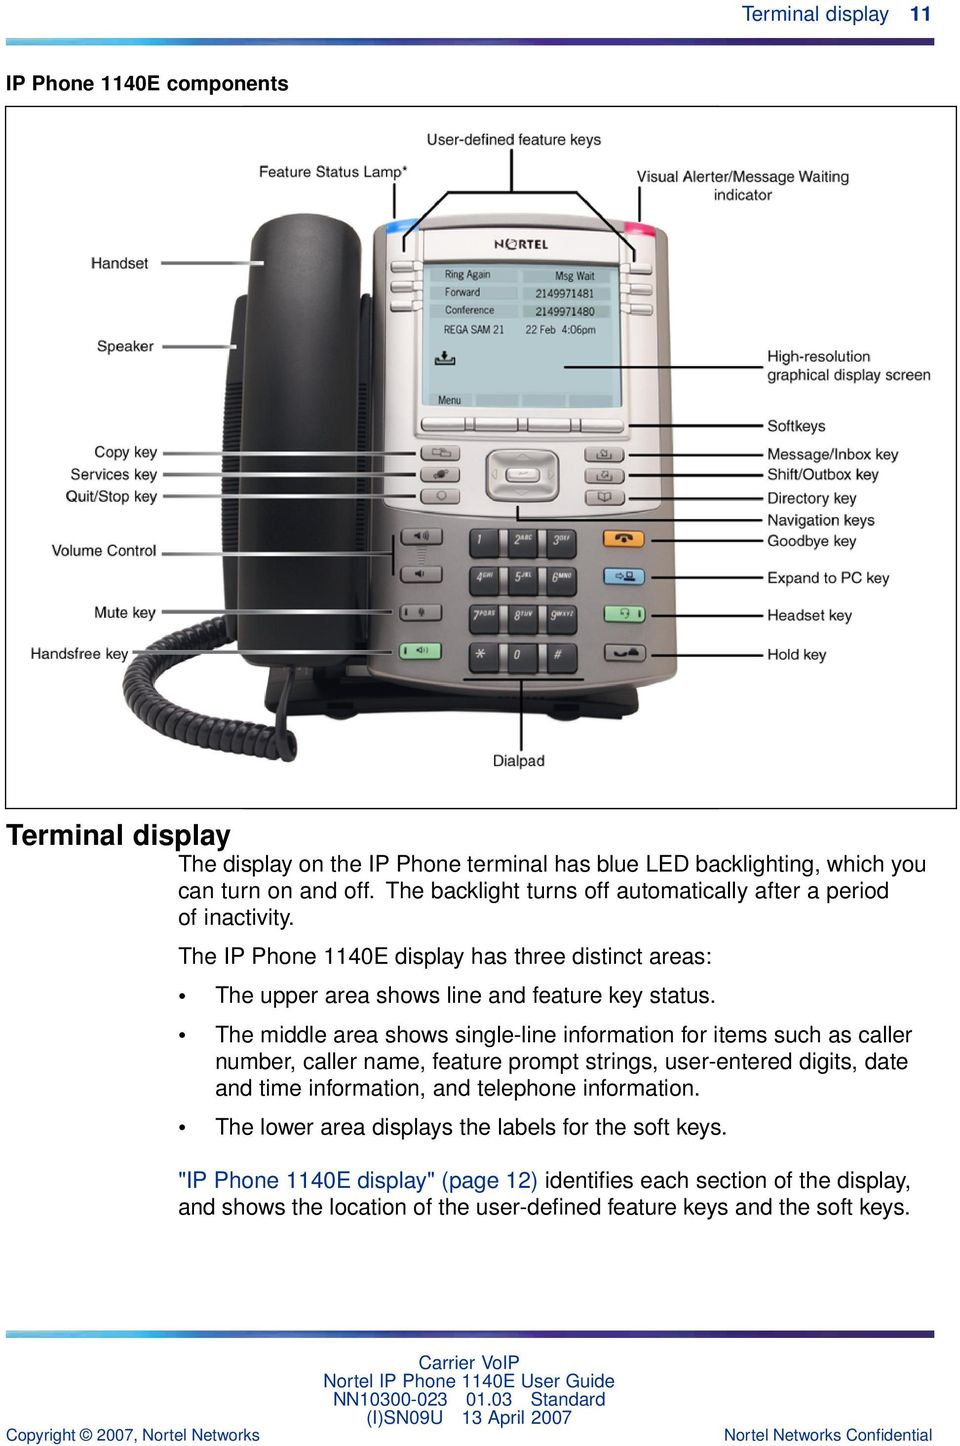 information for items such as caller number, caller name, feature prompt strings, user-entered digits, date and time information, and telephone information The lower area displays the